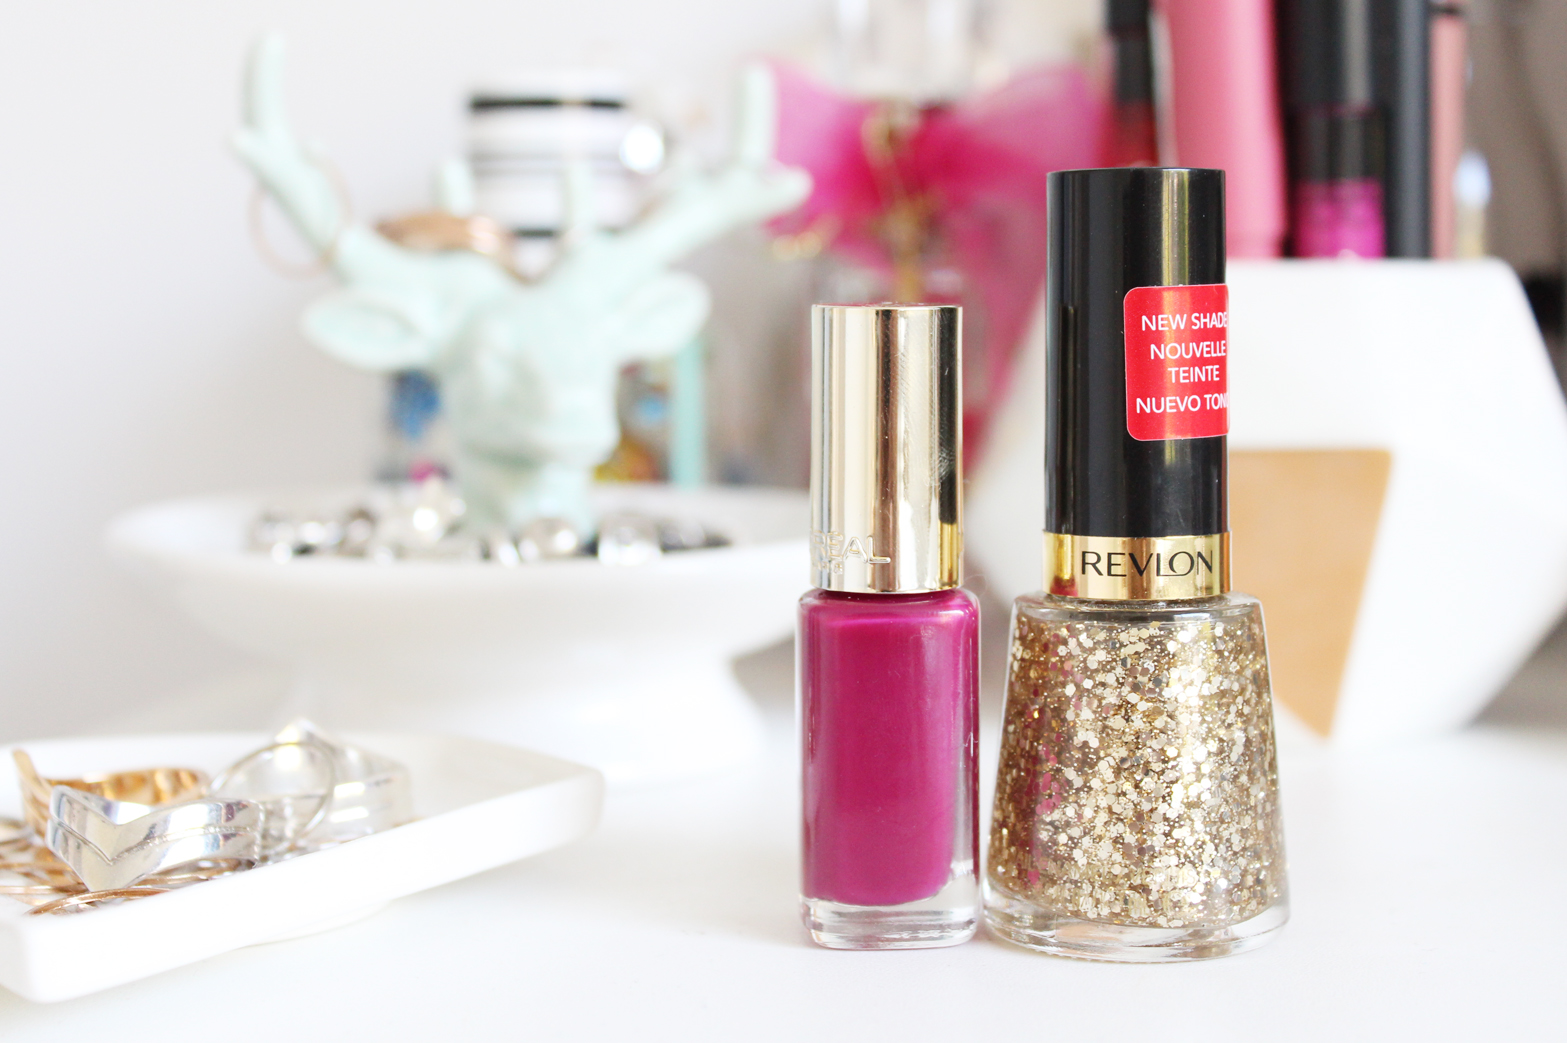 NOTD | L'Oreal Colour Riche Le Vernis in 870 Fourreau Inferno + Revlon Nail Lacquer in Sequins - CassandraMyee